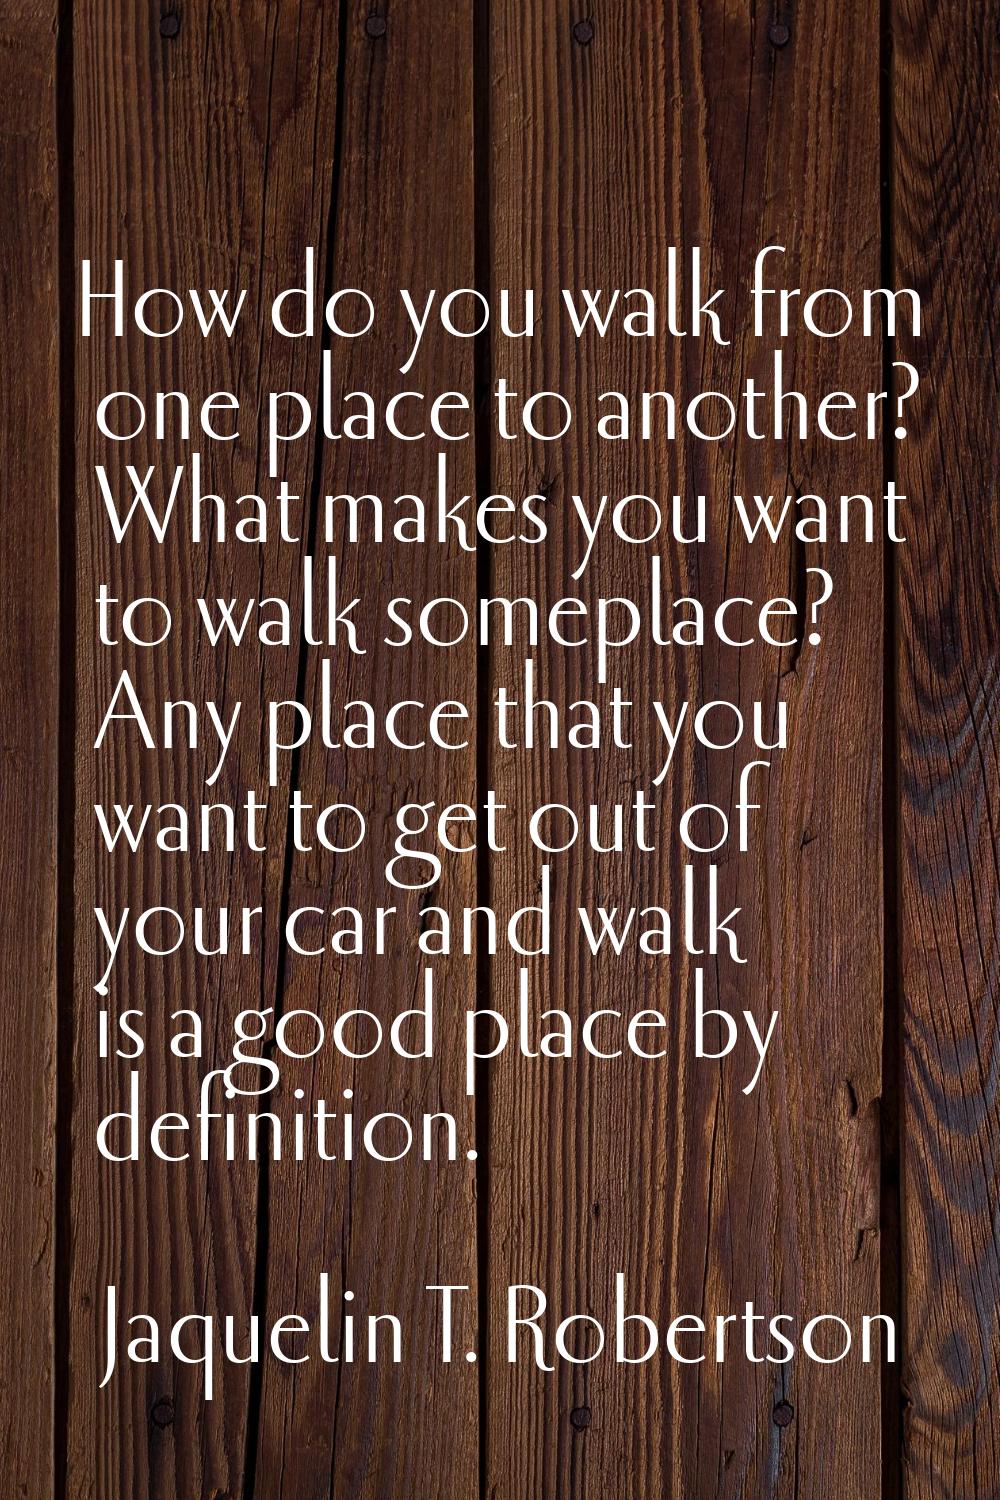 How do you walk from one place to another? What makes you want to walk someplace? Any place that yo